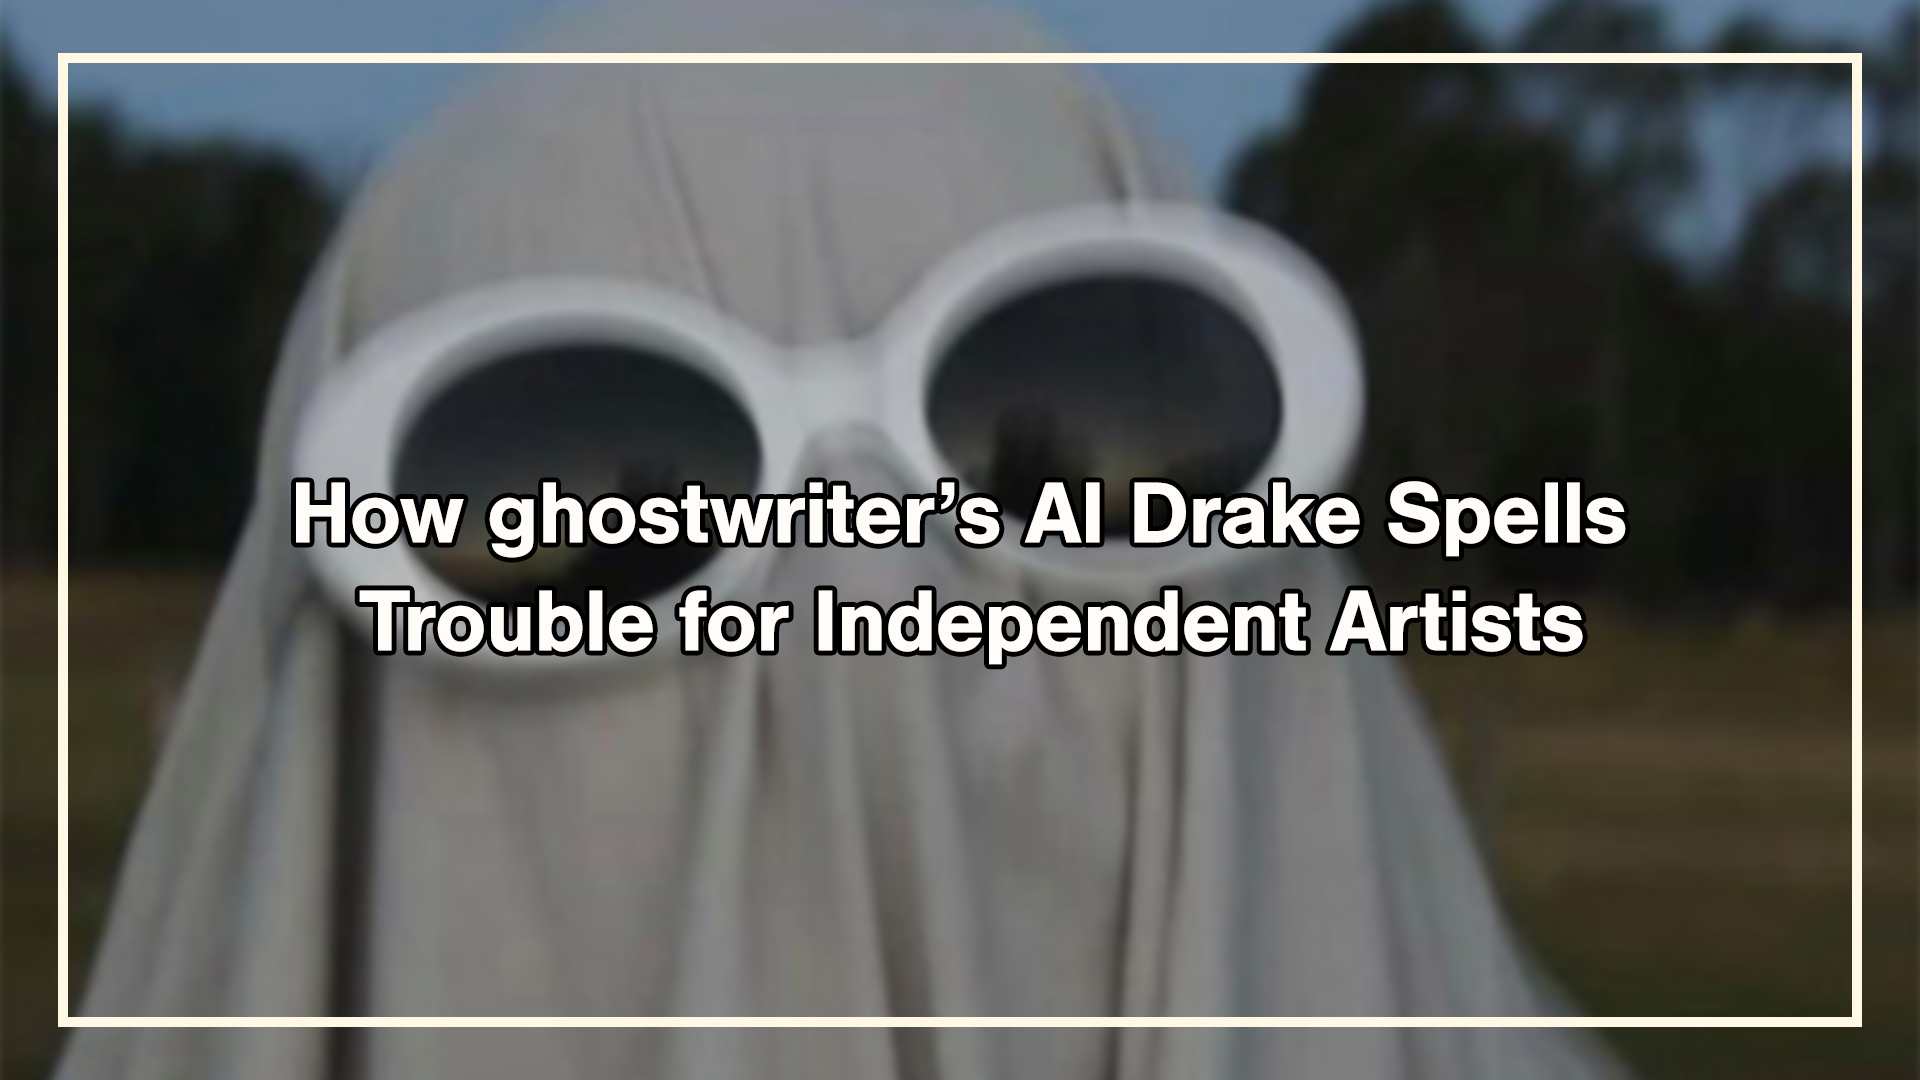 How ghostwriter’s “AI Drake” Could Spell Trouble for Independent Artists